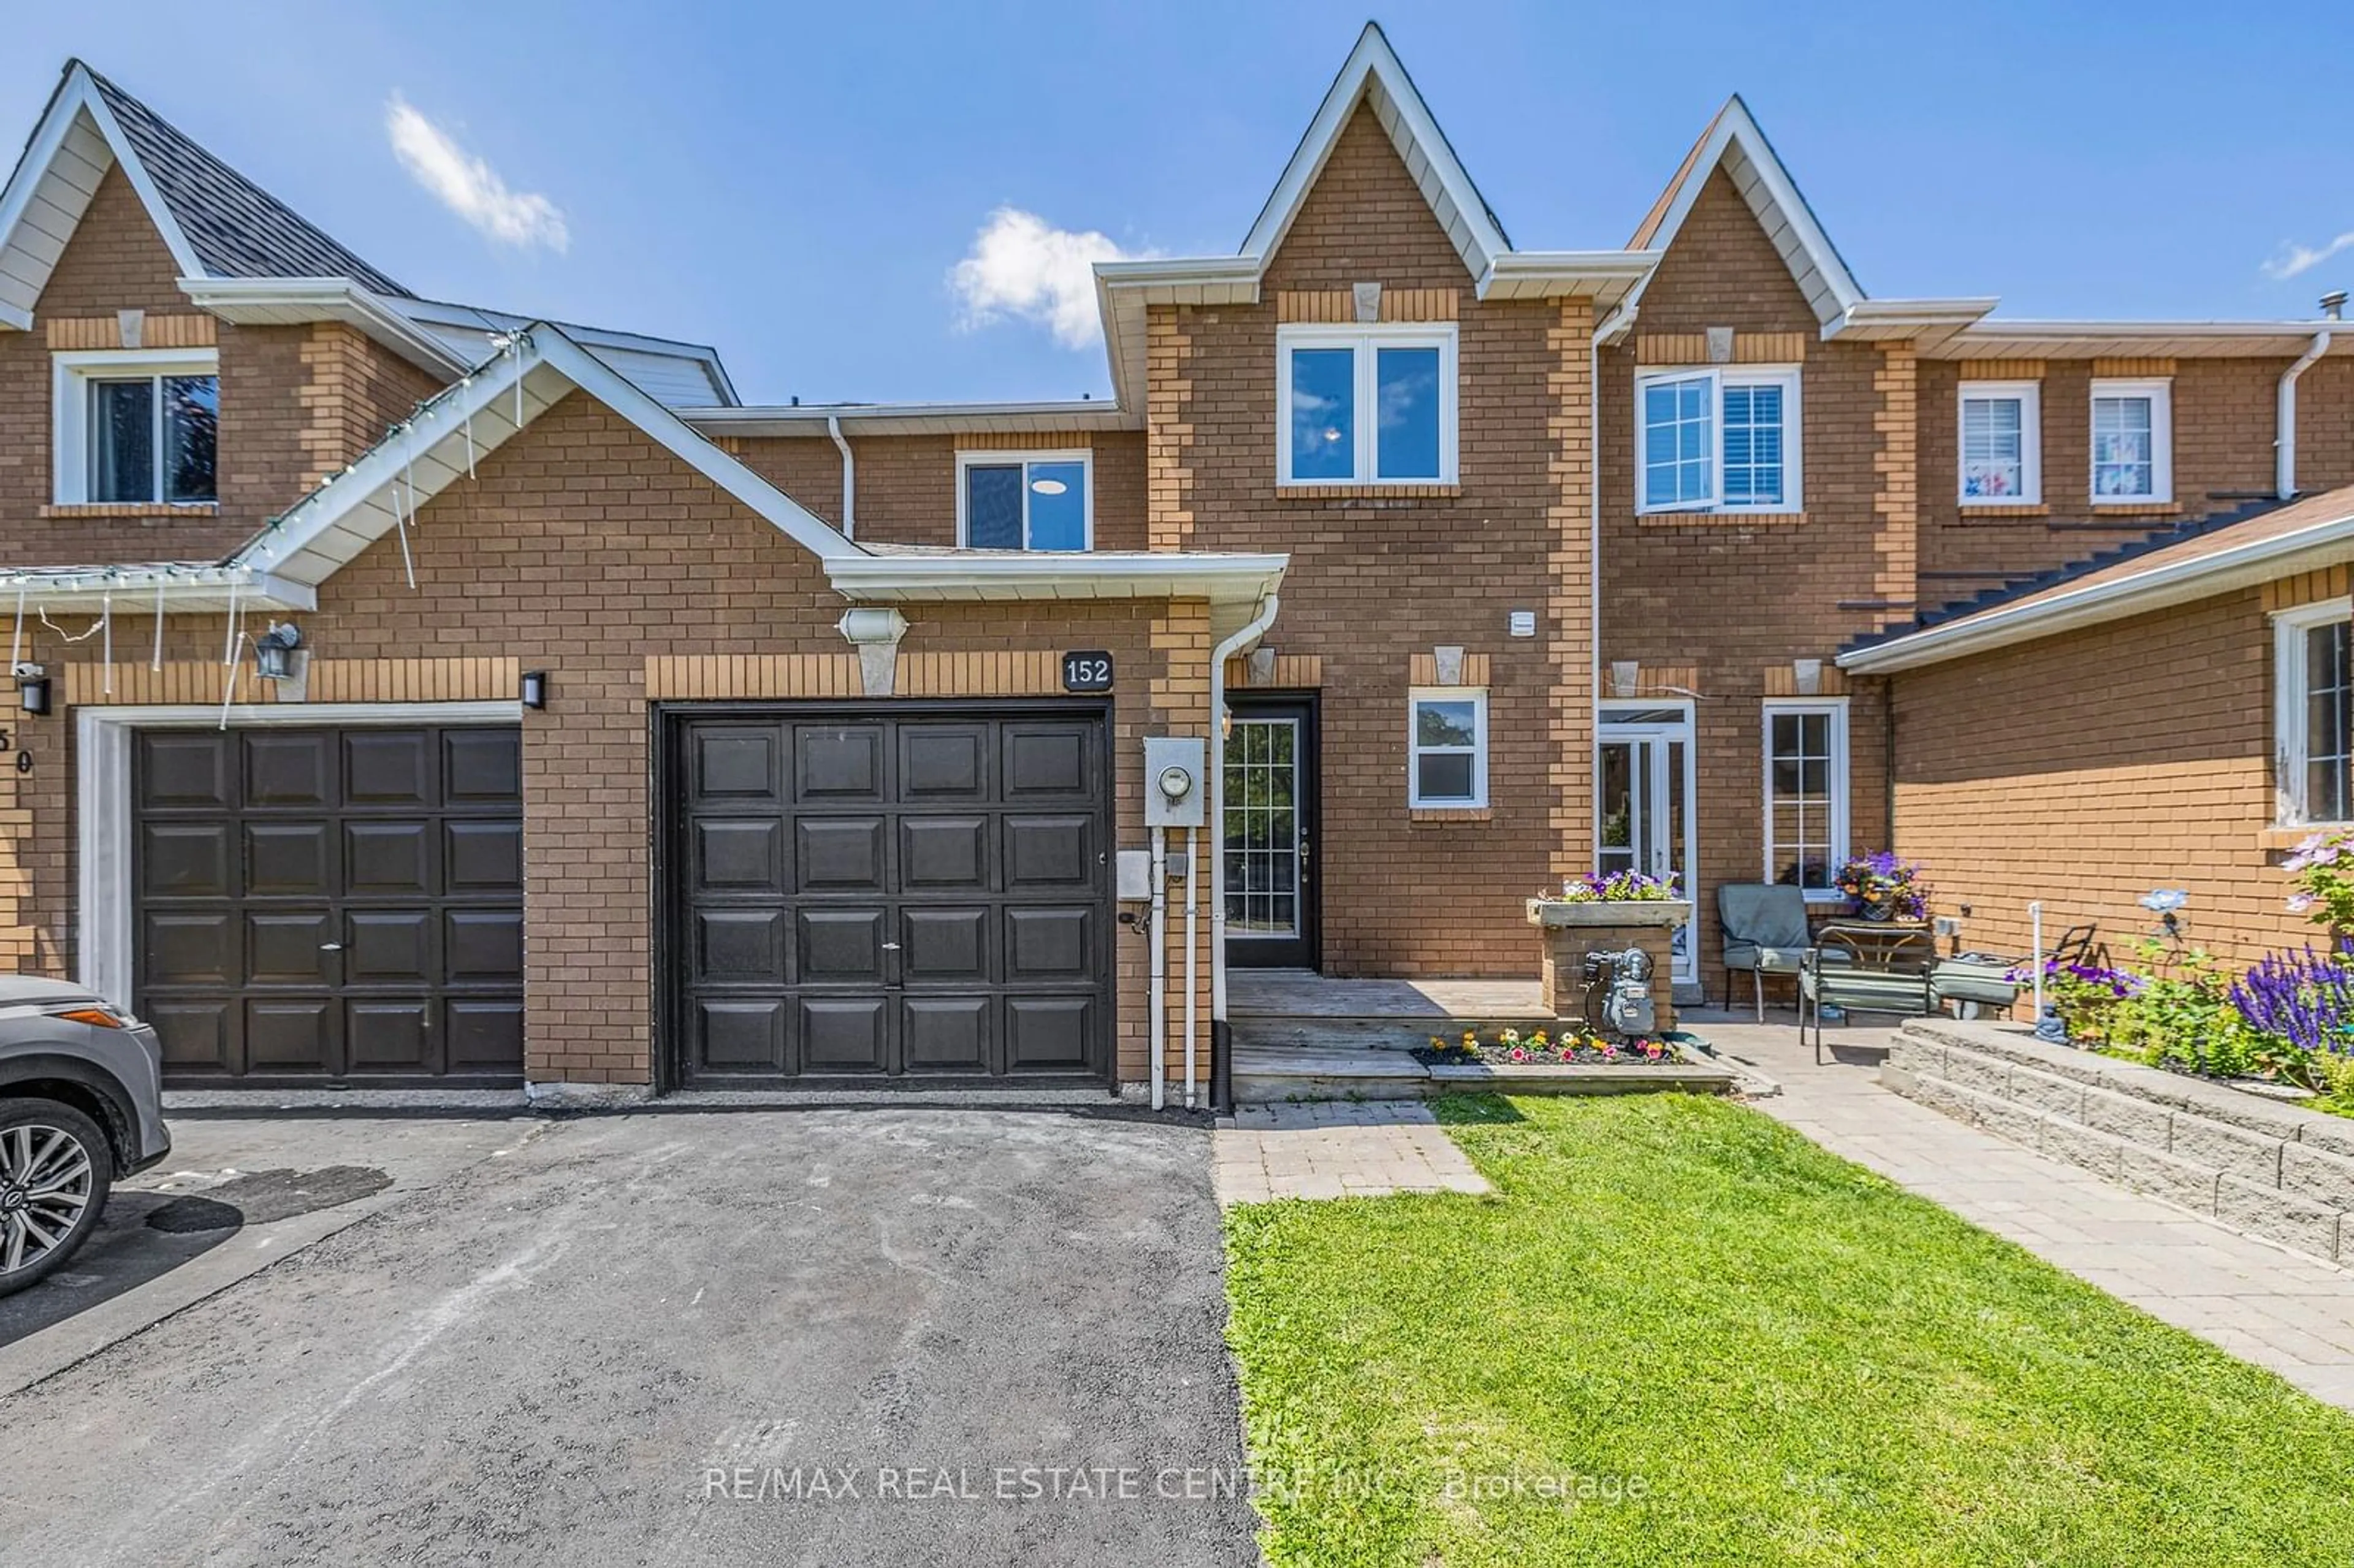 Home with brick exterior material for 152 Howard Cres, Orangeville Ontario L9W 4W3